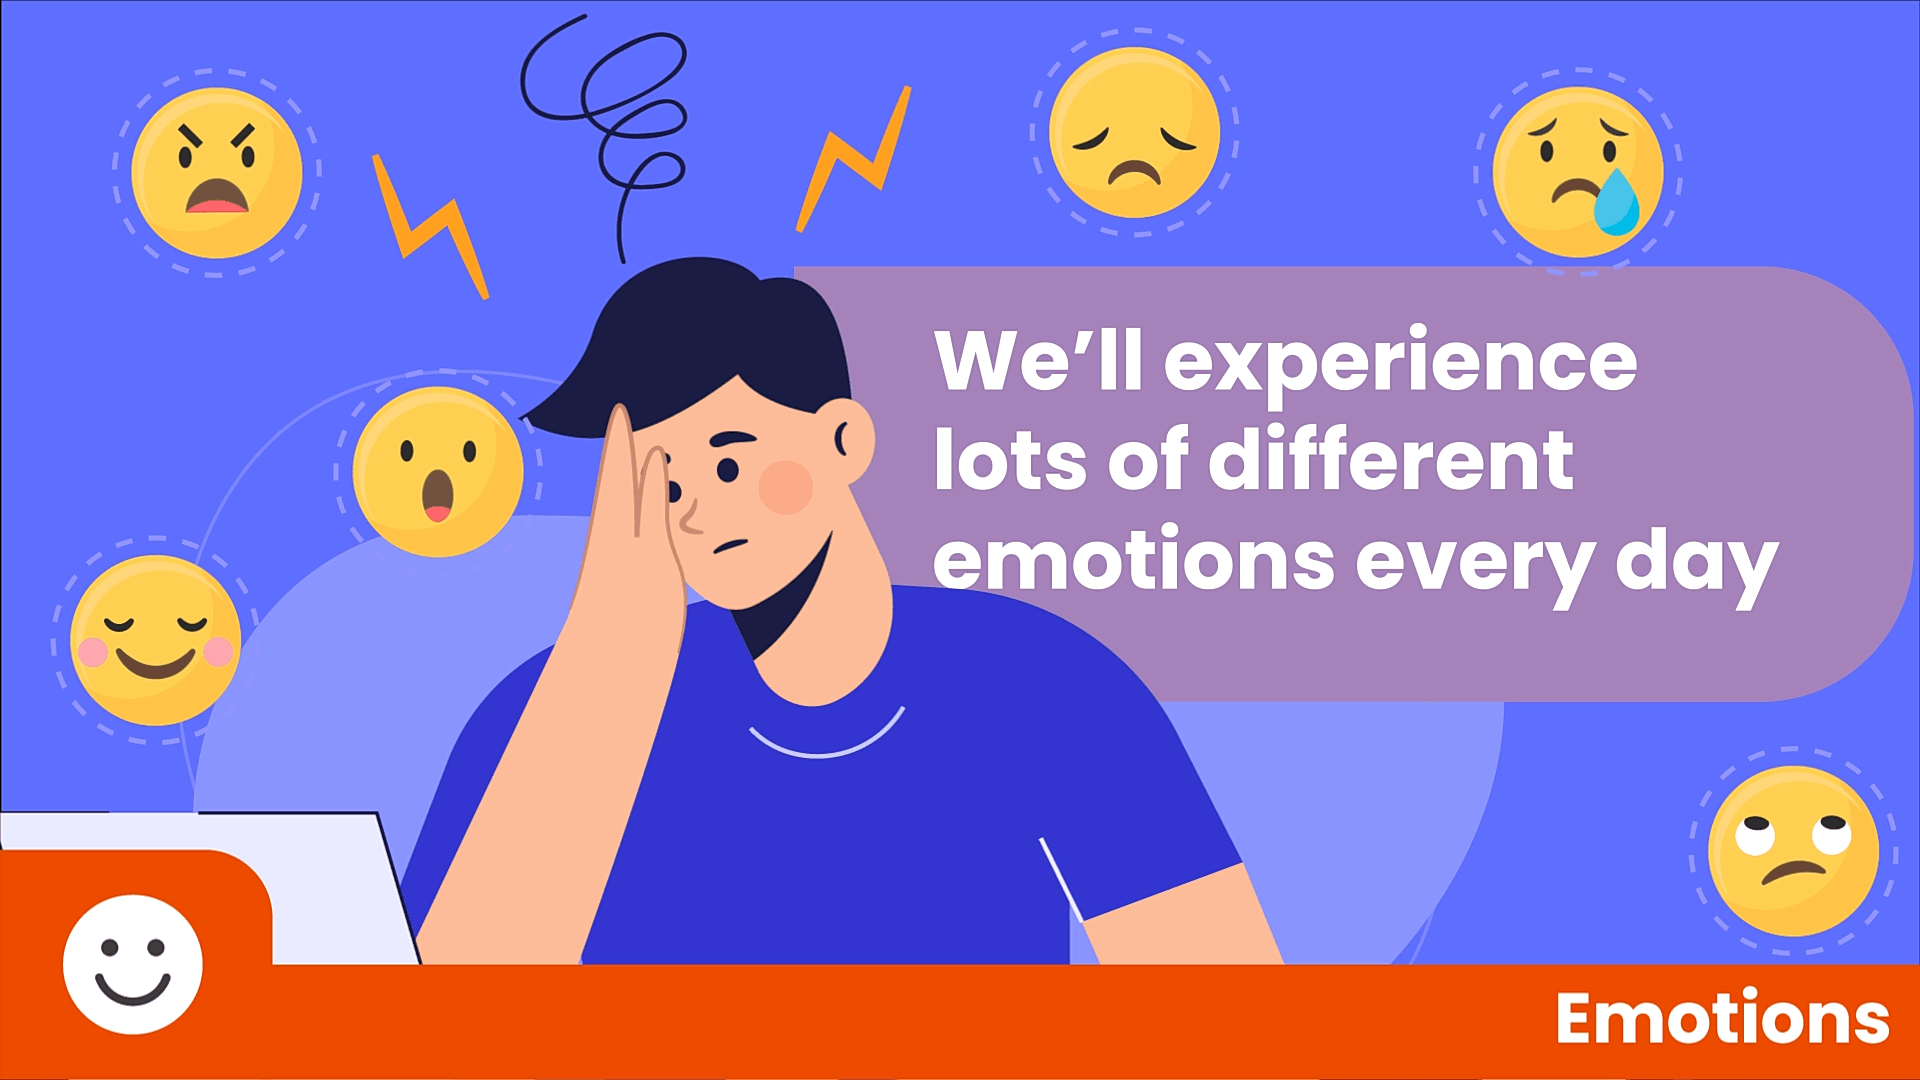 We'll experience lots of different emotions every day